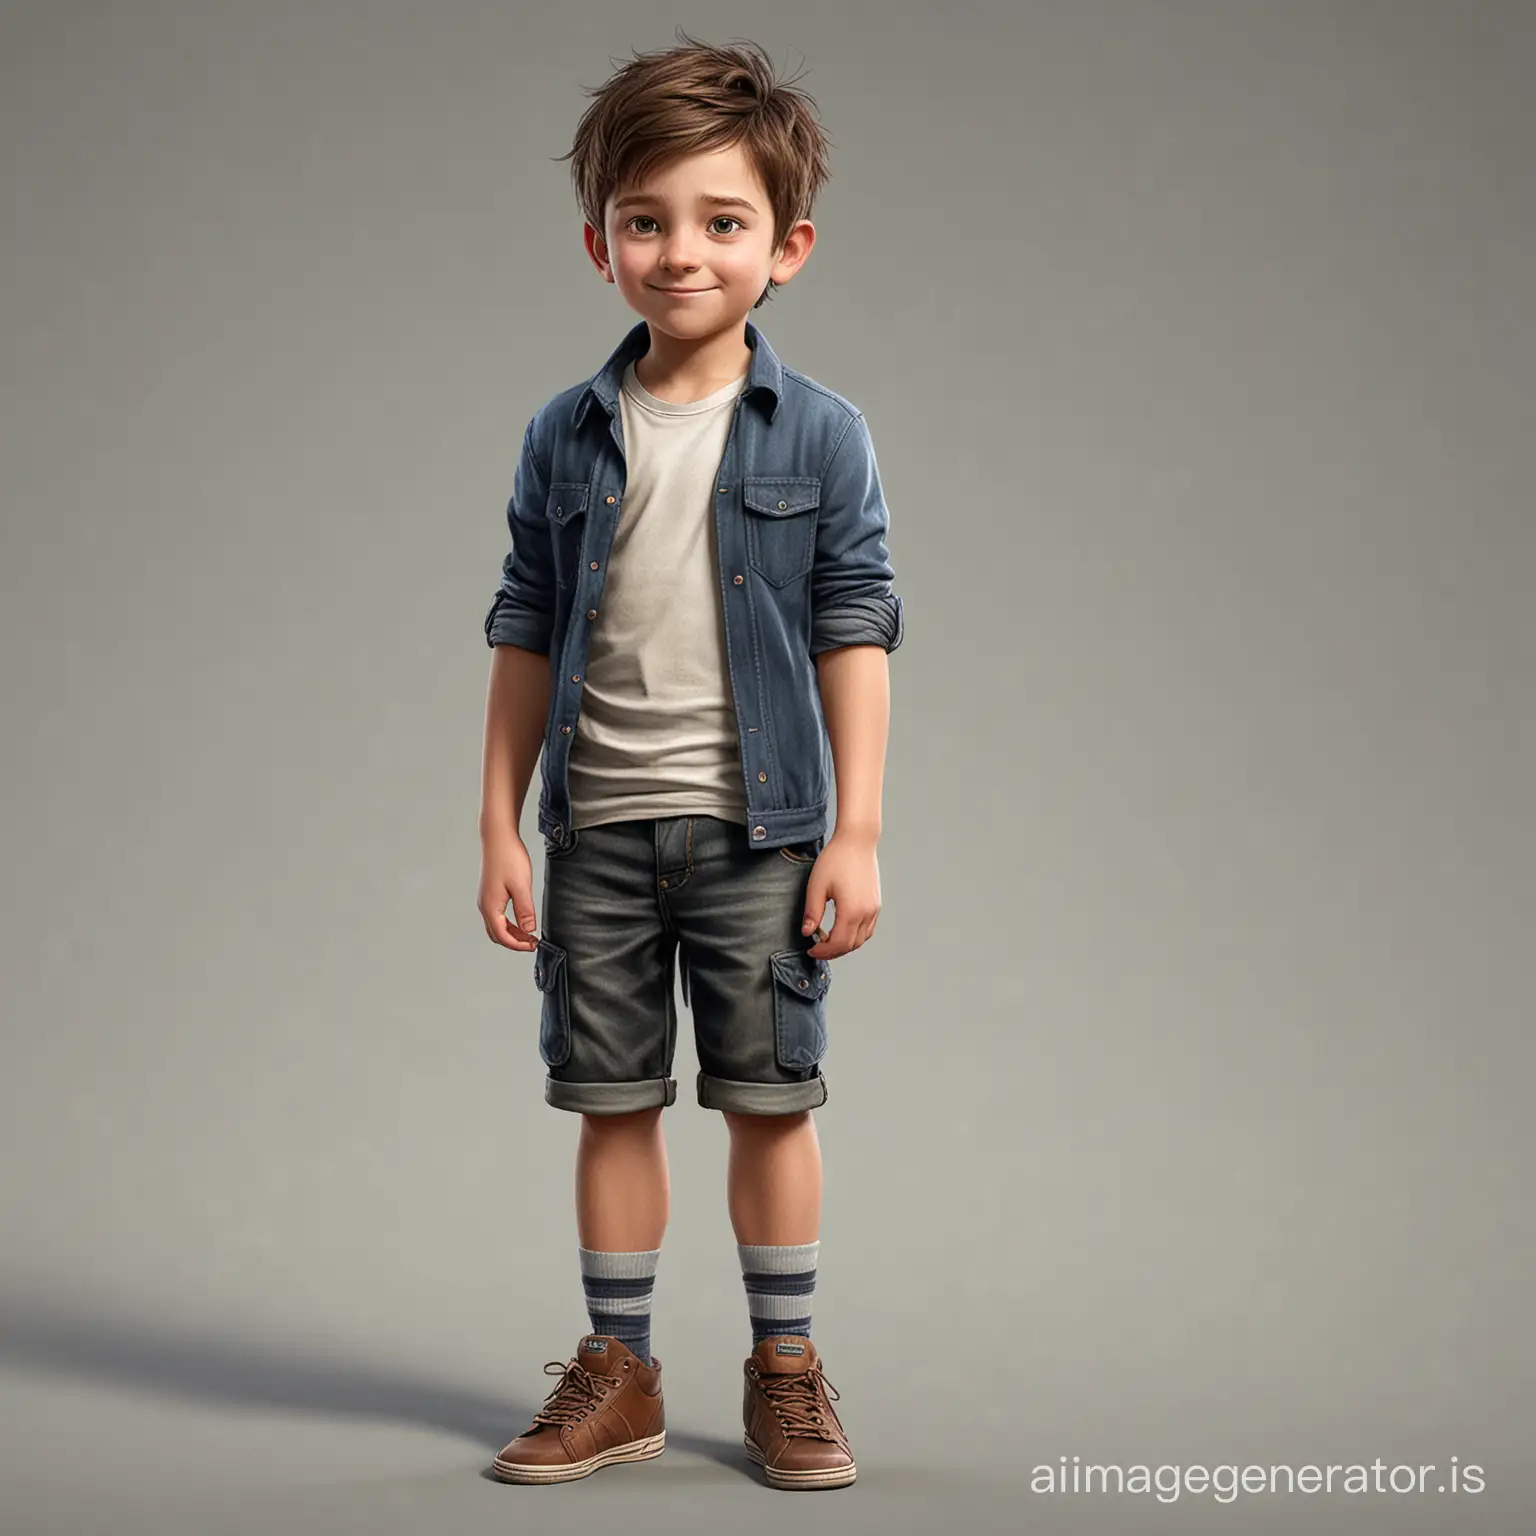 caracature of a boy 10 year full body shot, very cute hyper realistic